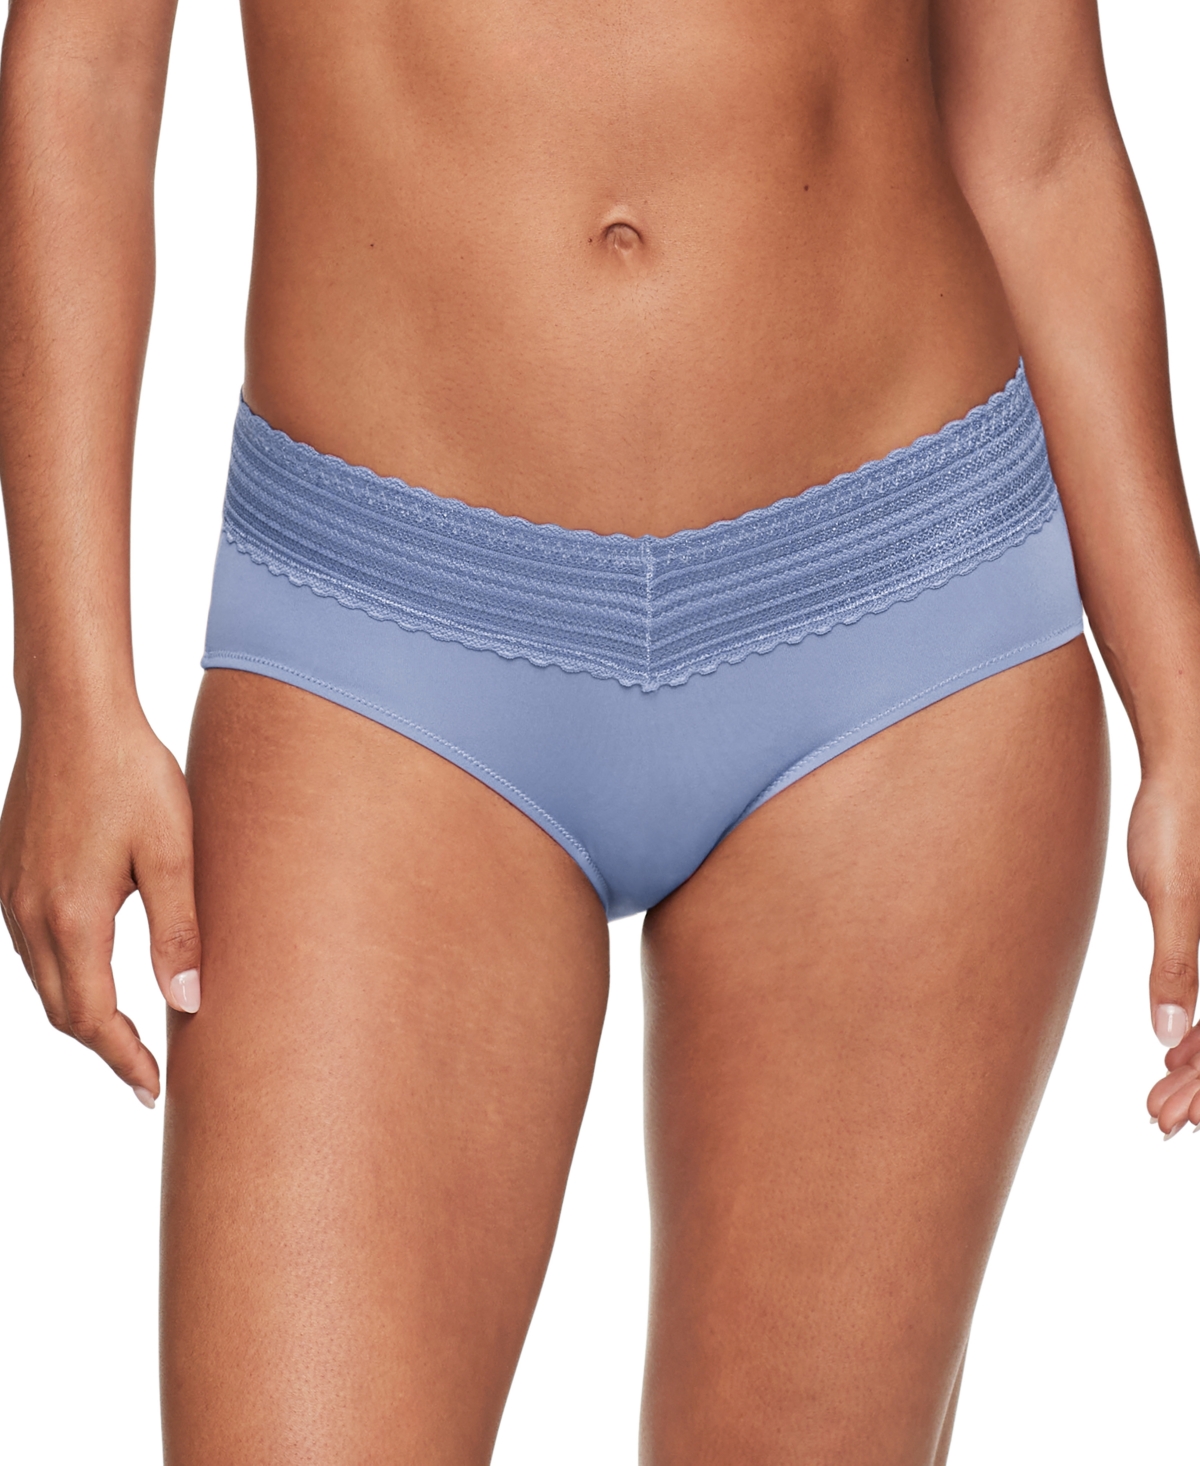 Warner's Warners No Pinching, No Problems Dig-free Comfort Waist With Lace Microfiber Hipster 5609j In Periwinkle